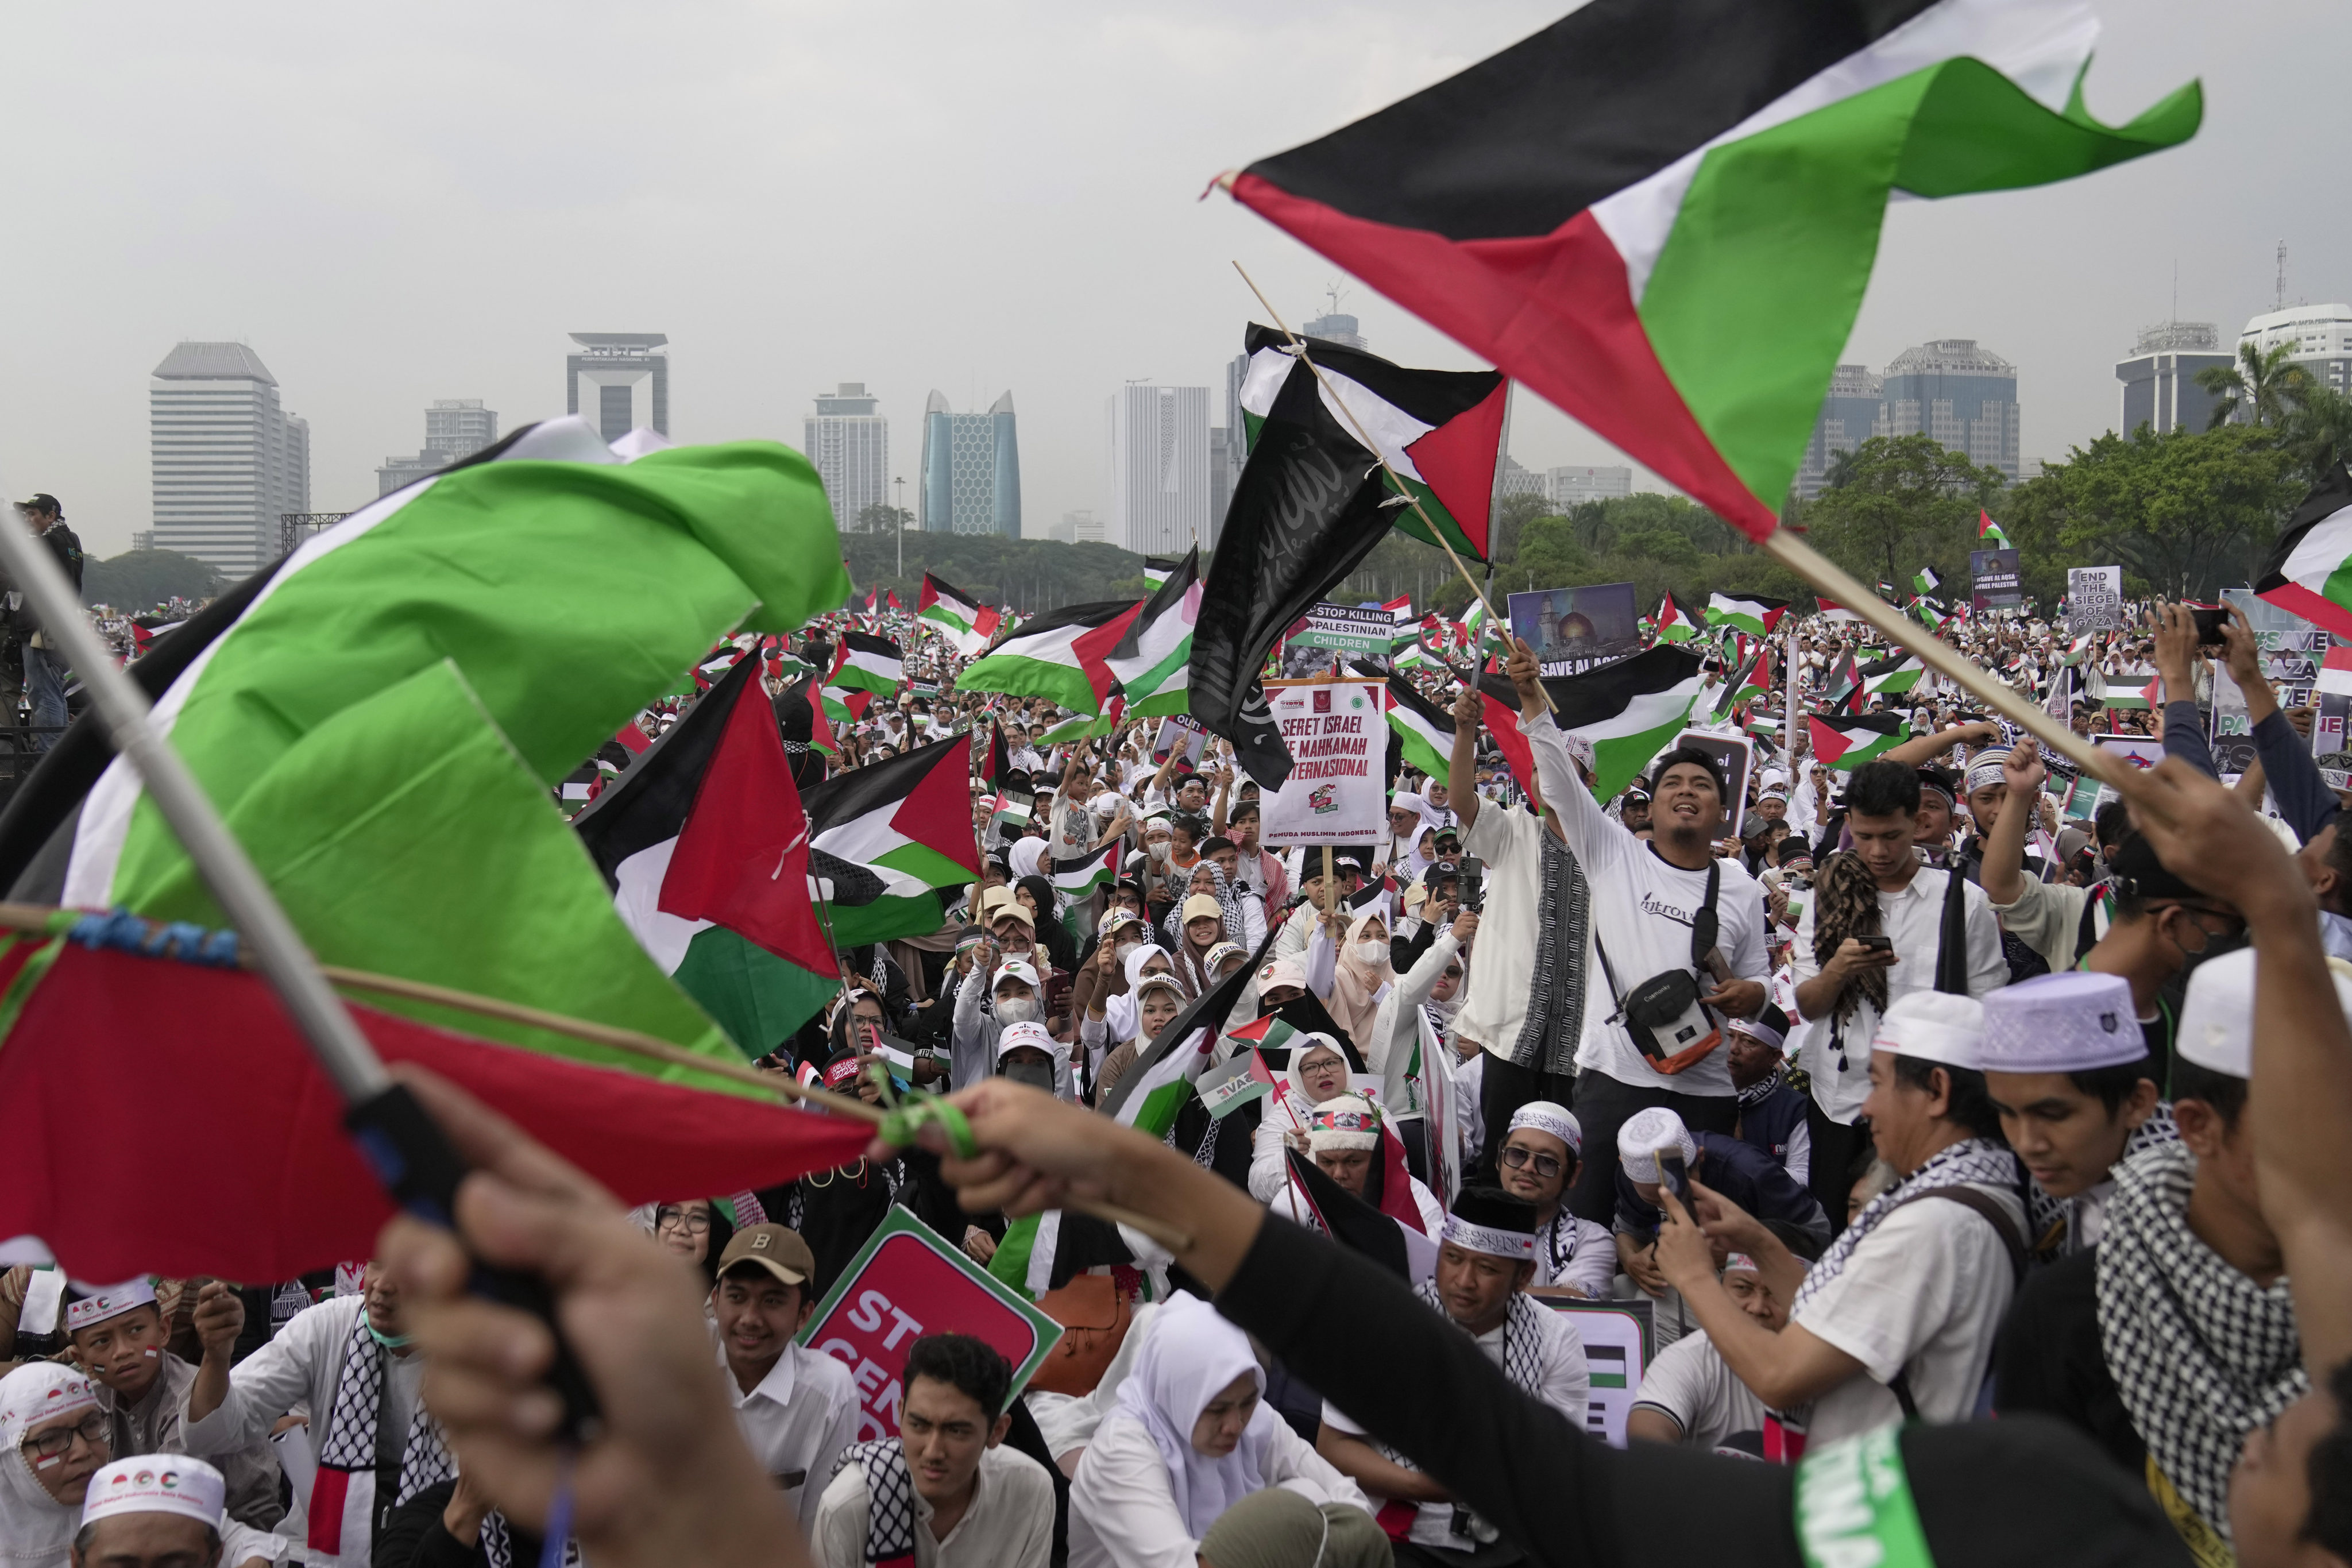 Protesters shout slogans and wave Palestinian flags during a rally in Jakarta on Sunday. Photo: AP